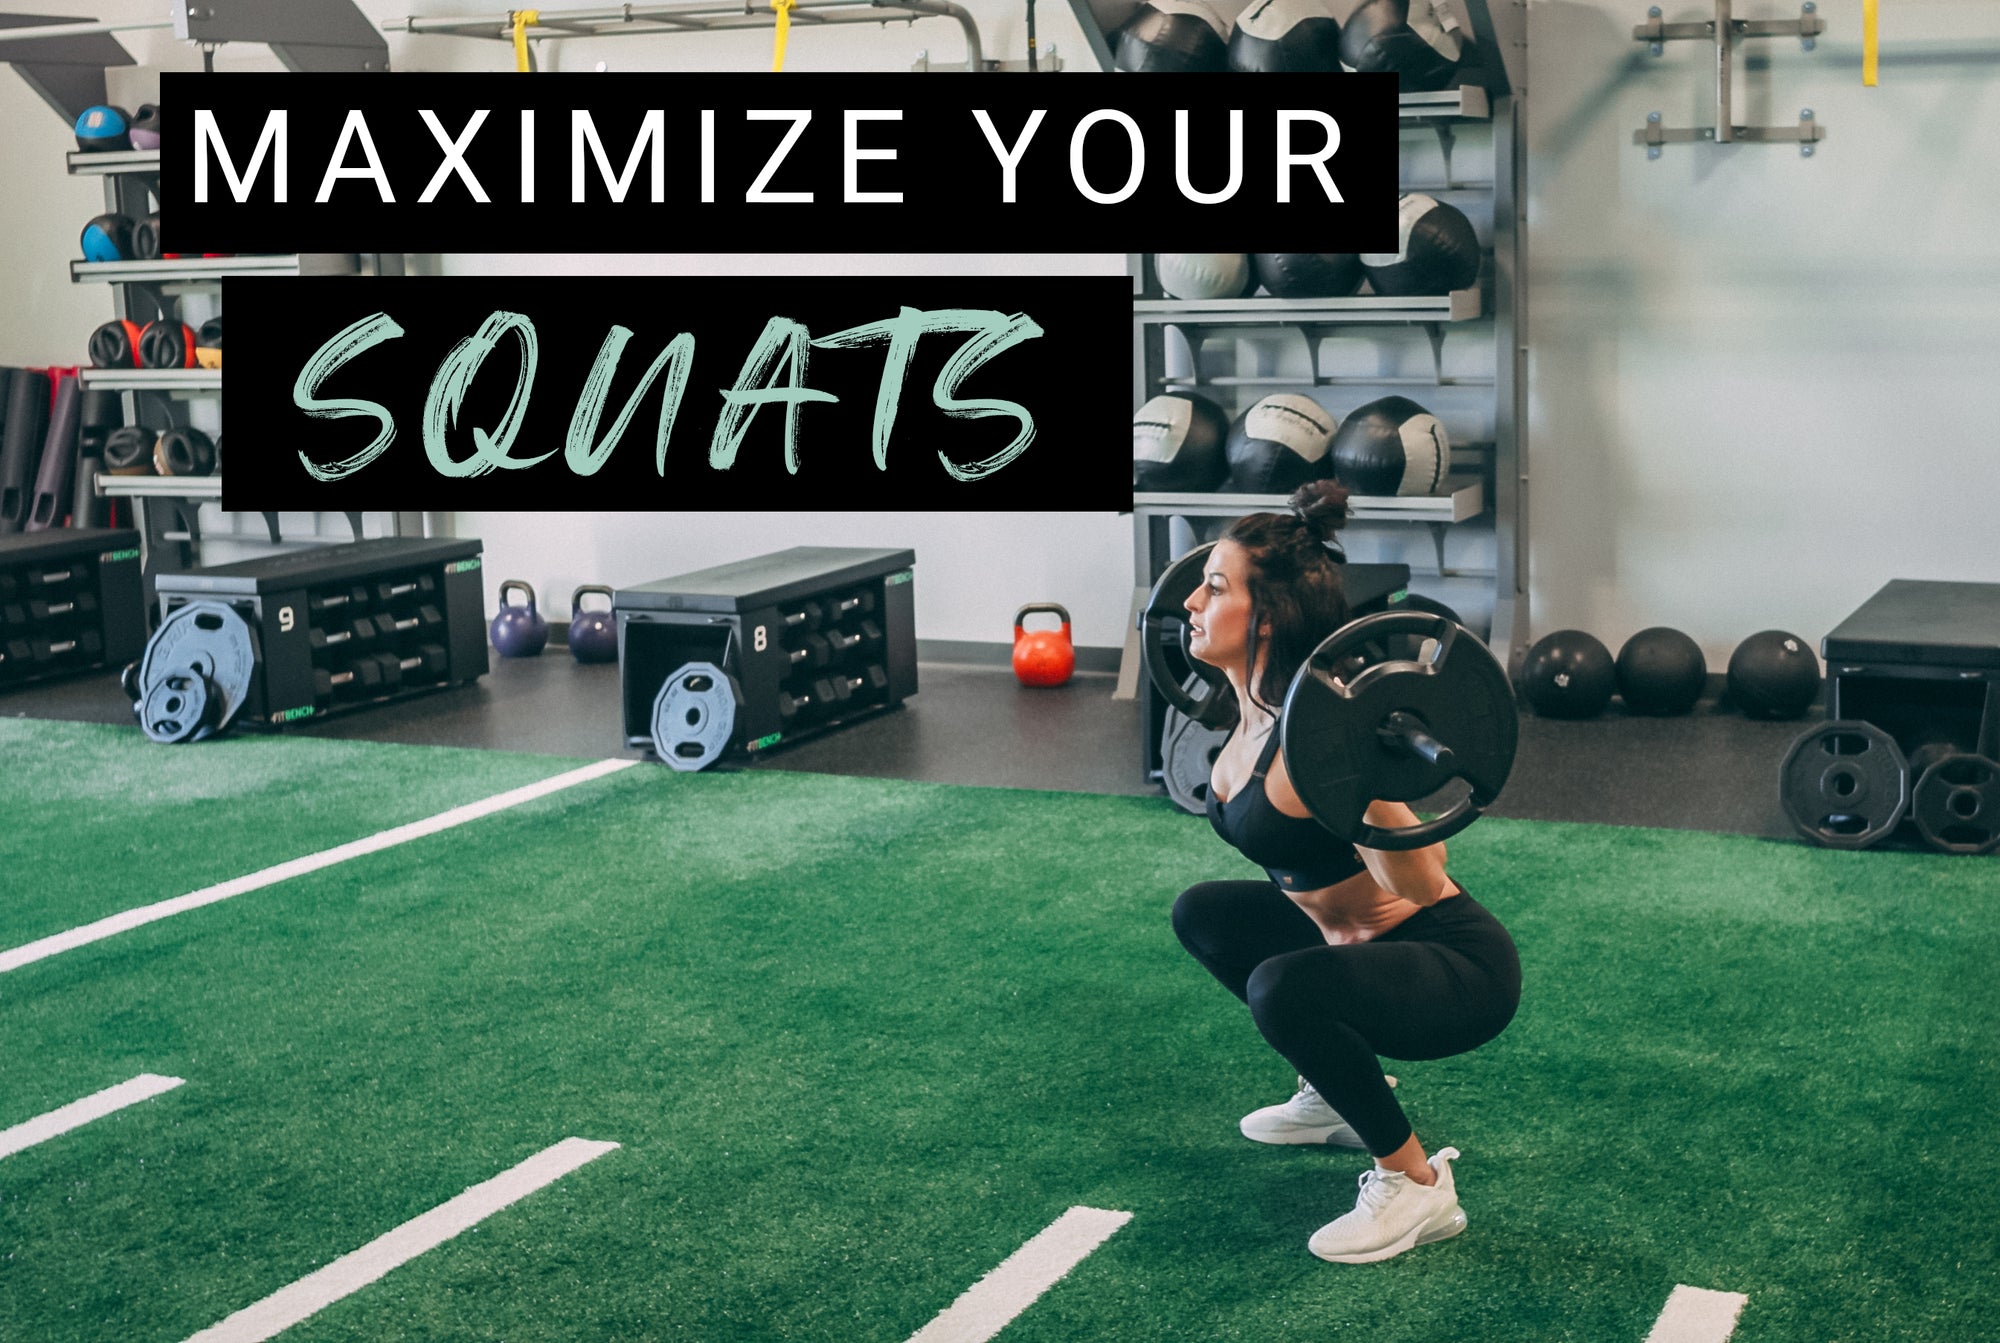 How to Maximize Your Squats